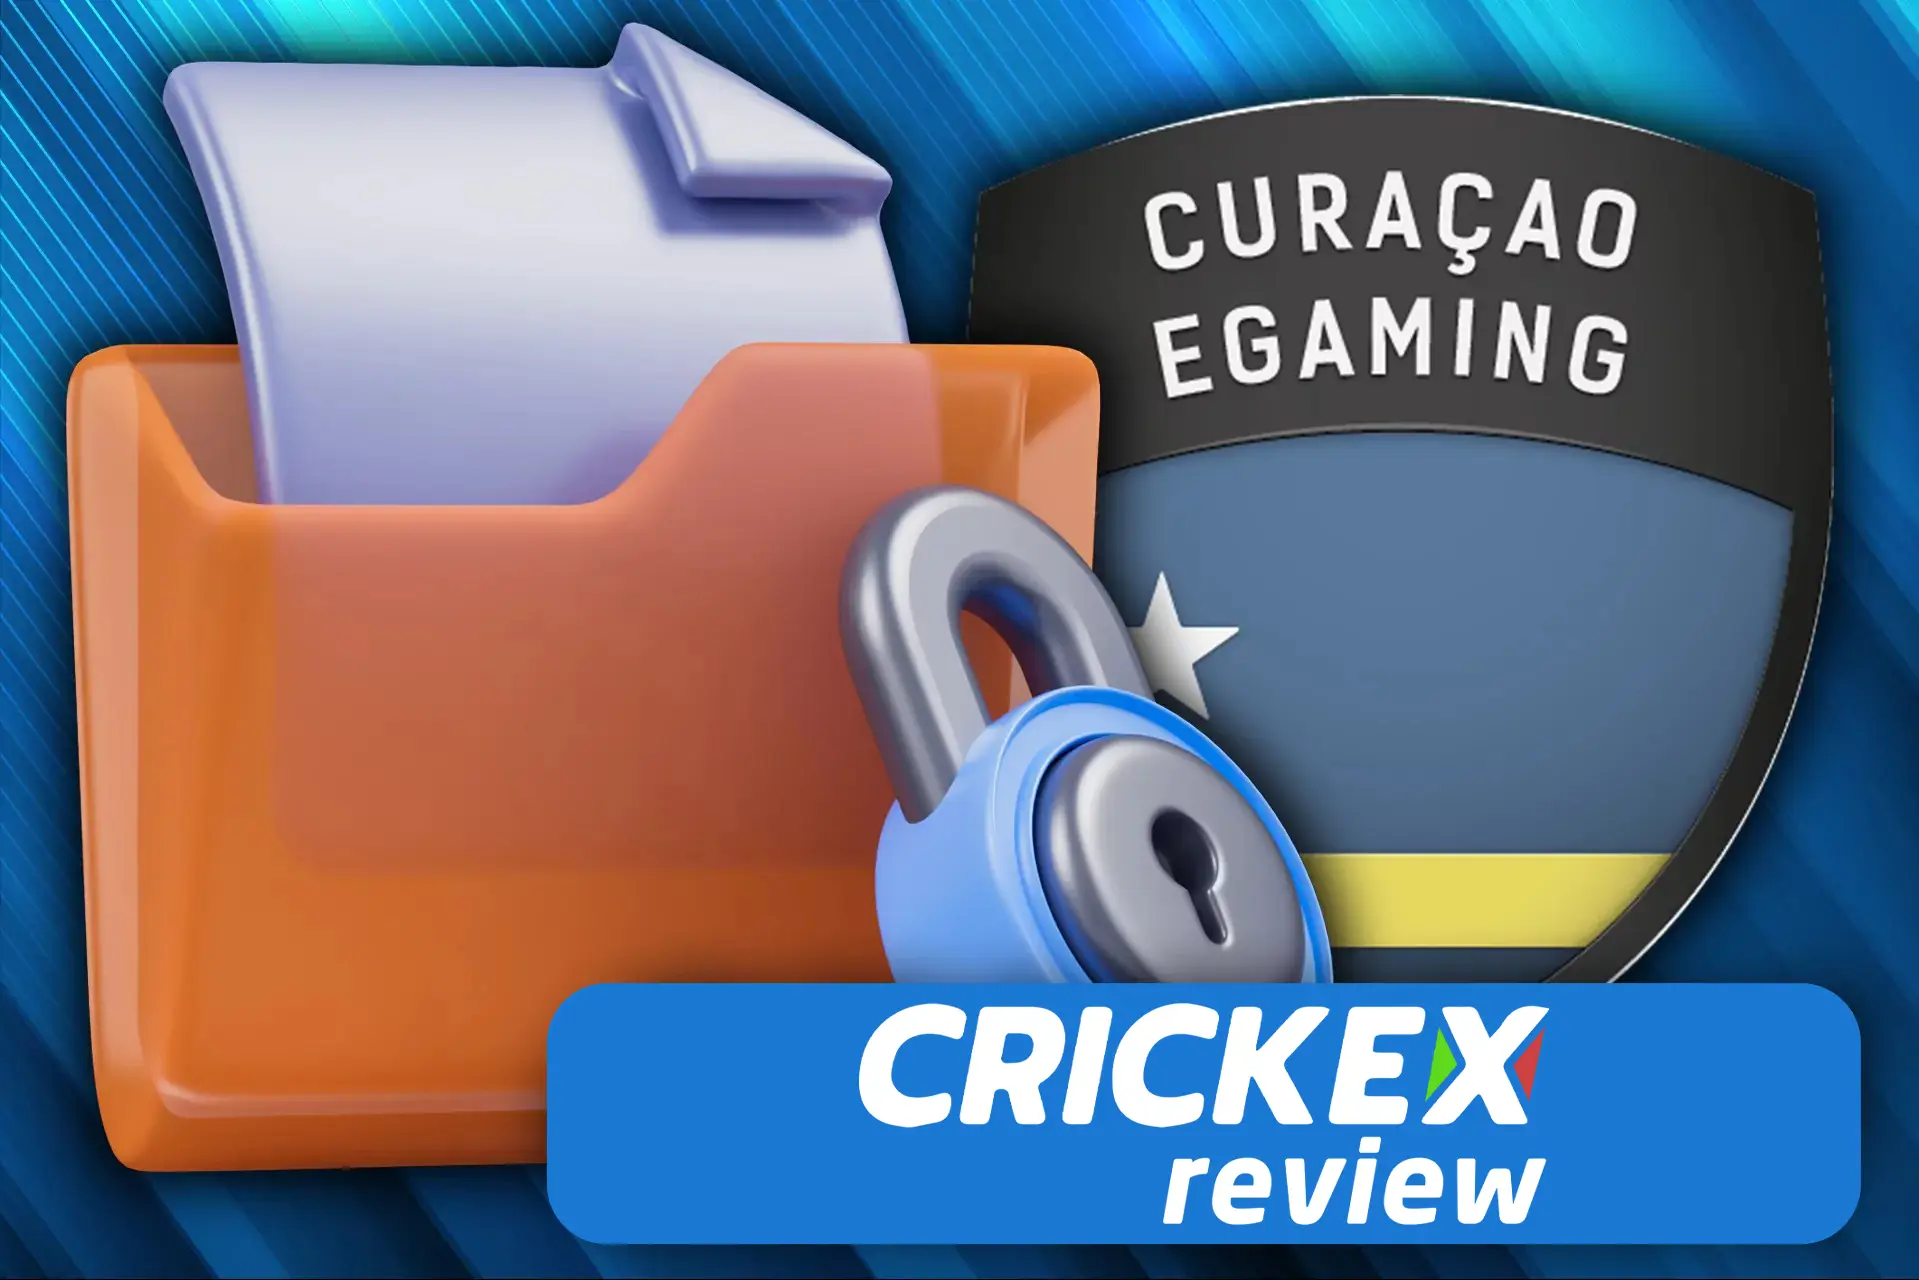 Crickex operates in Bangladesh under the Curacao gaming license.